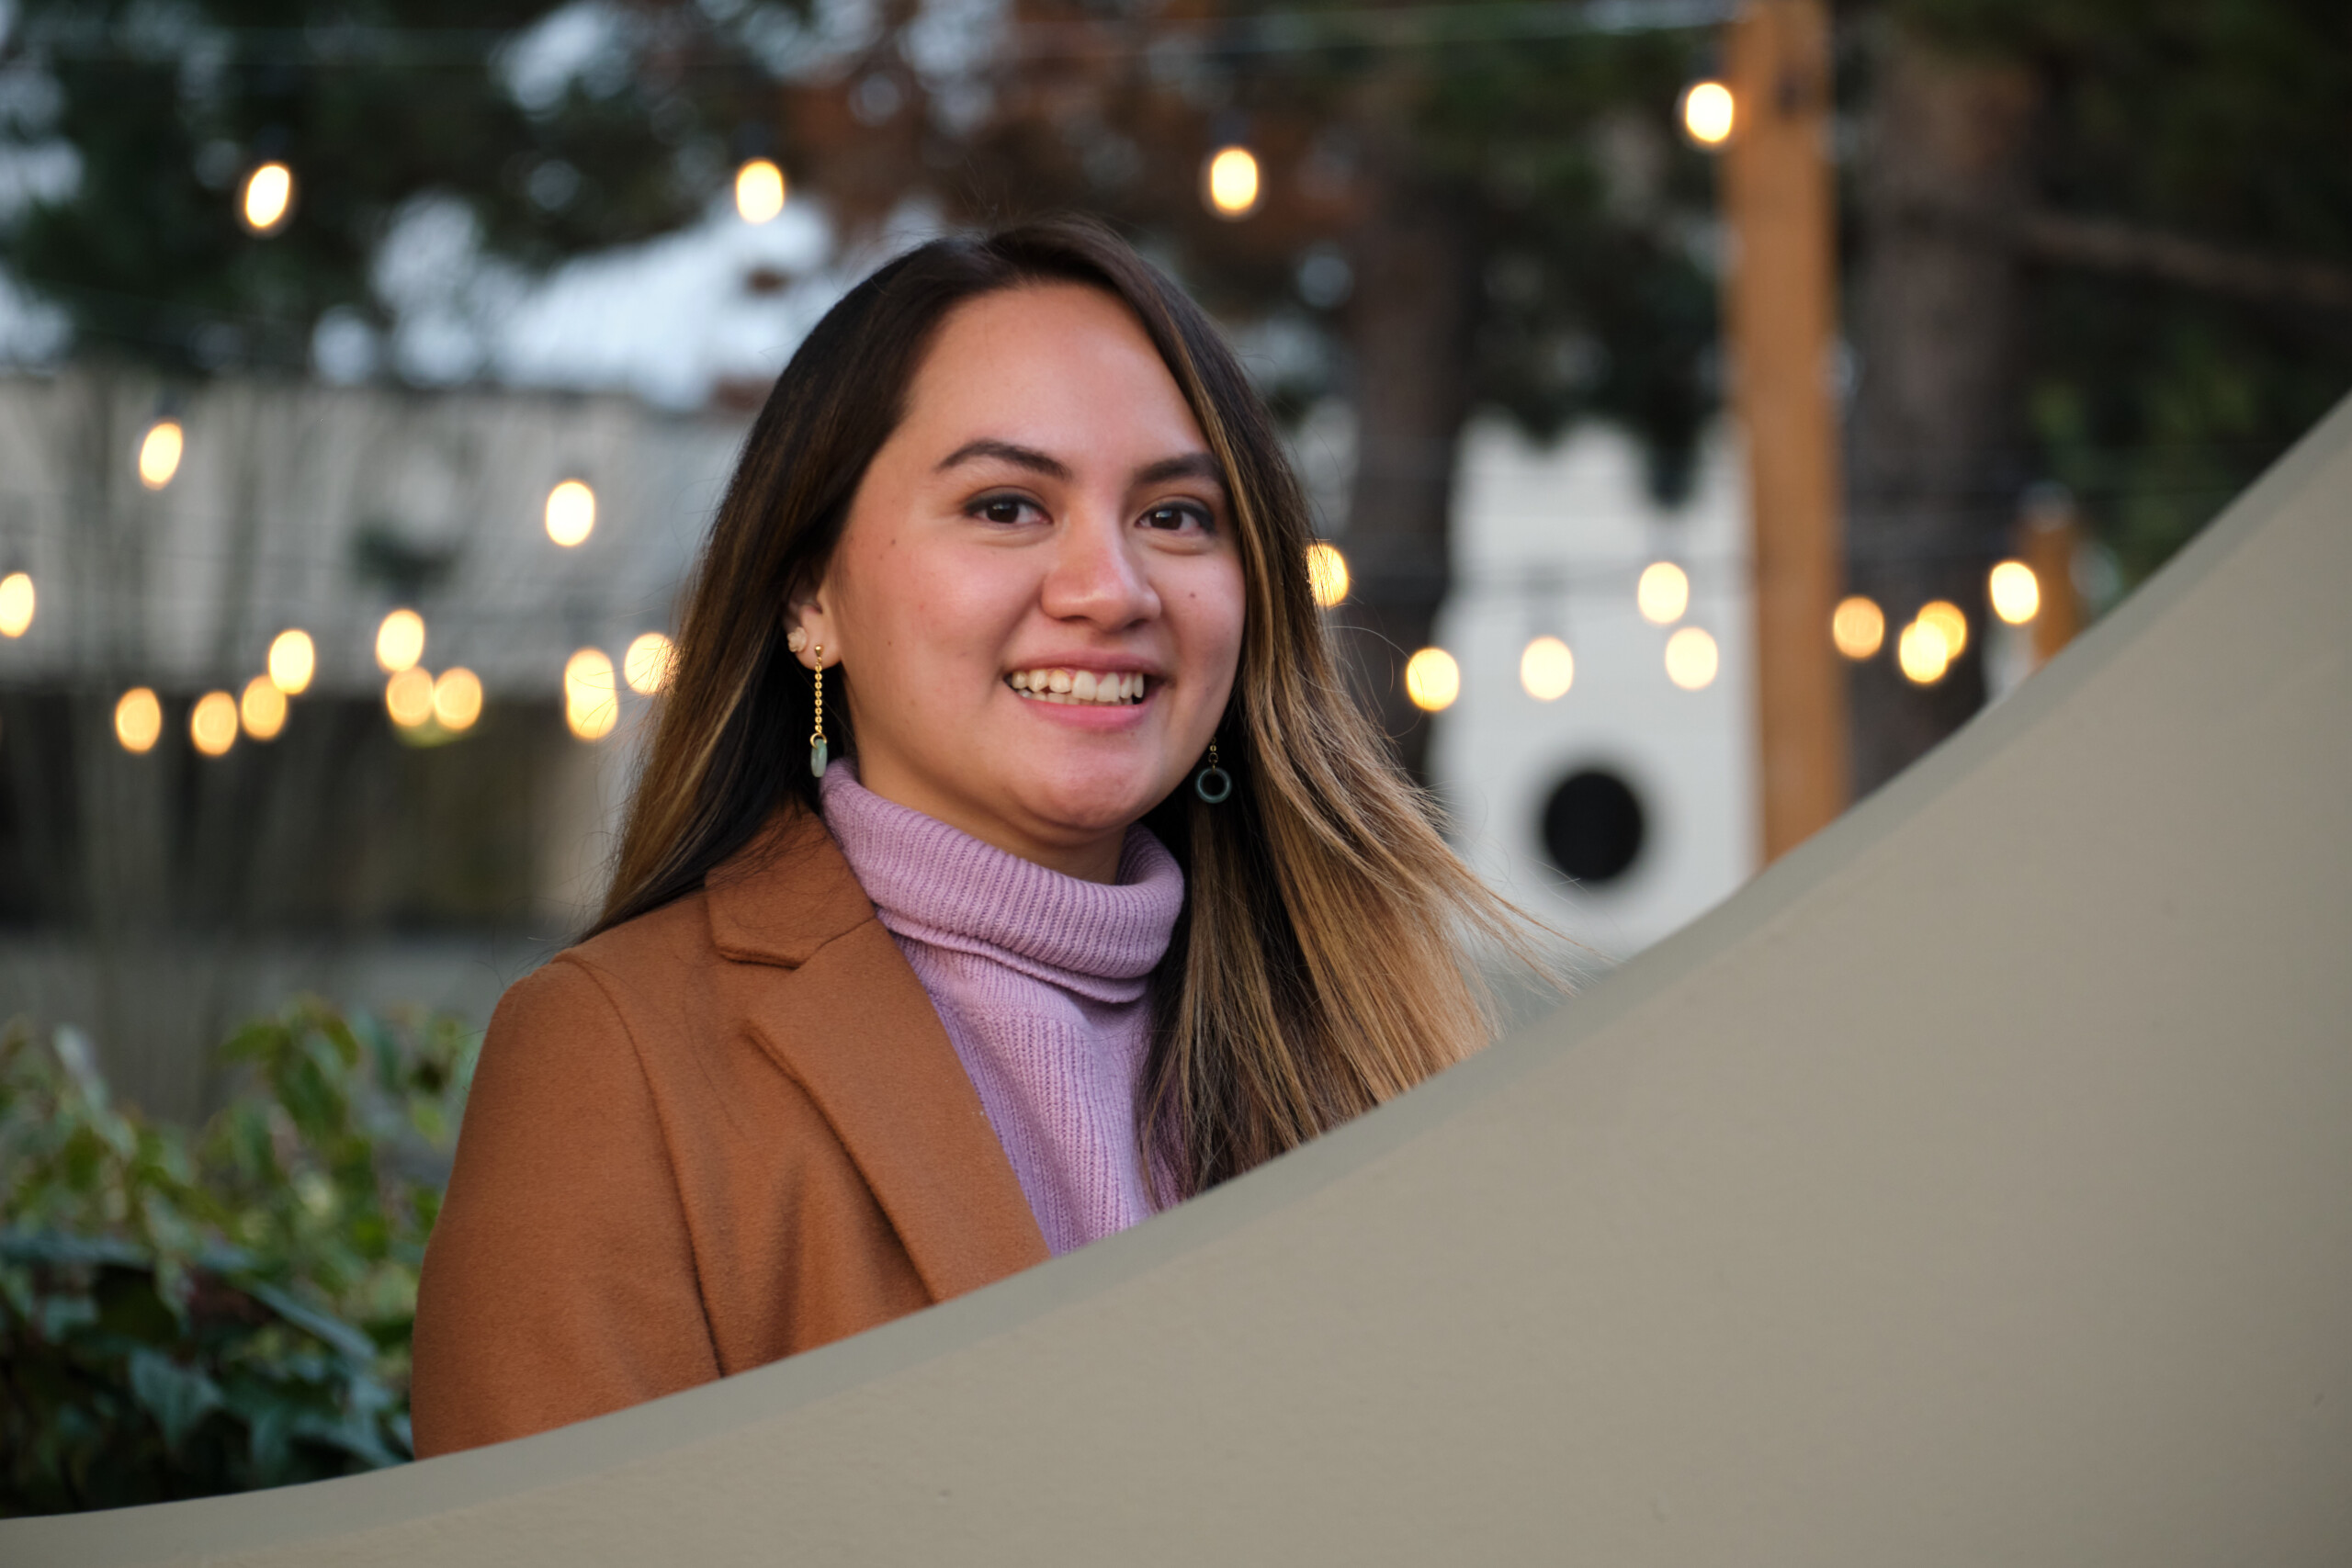 April Rose wearing a brown blazer over a pink sweater, smiles into the camera outside with hanging white lights behind her